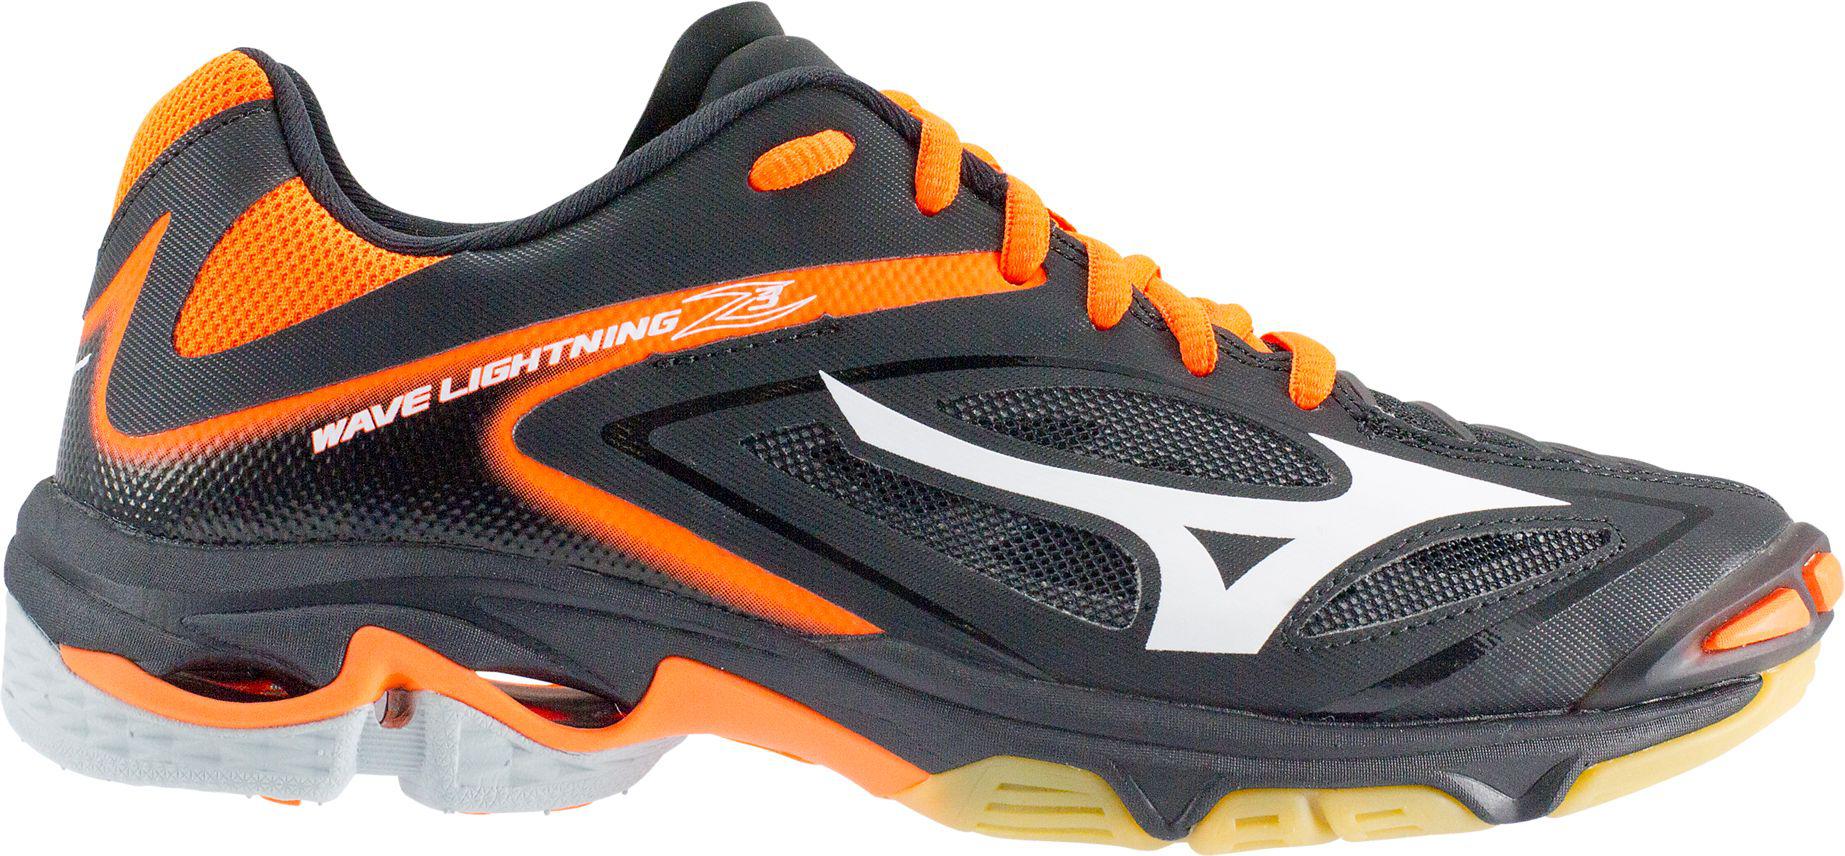 Wave Lightning Z3 Volleyball Shoes 